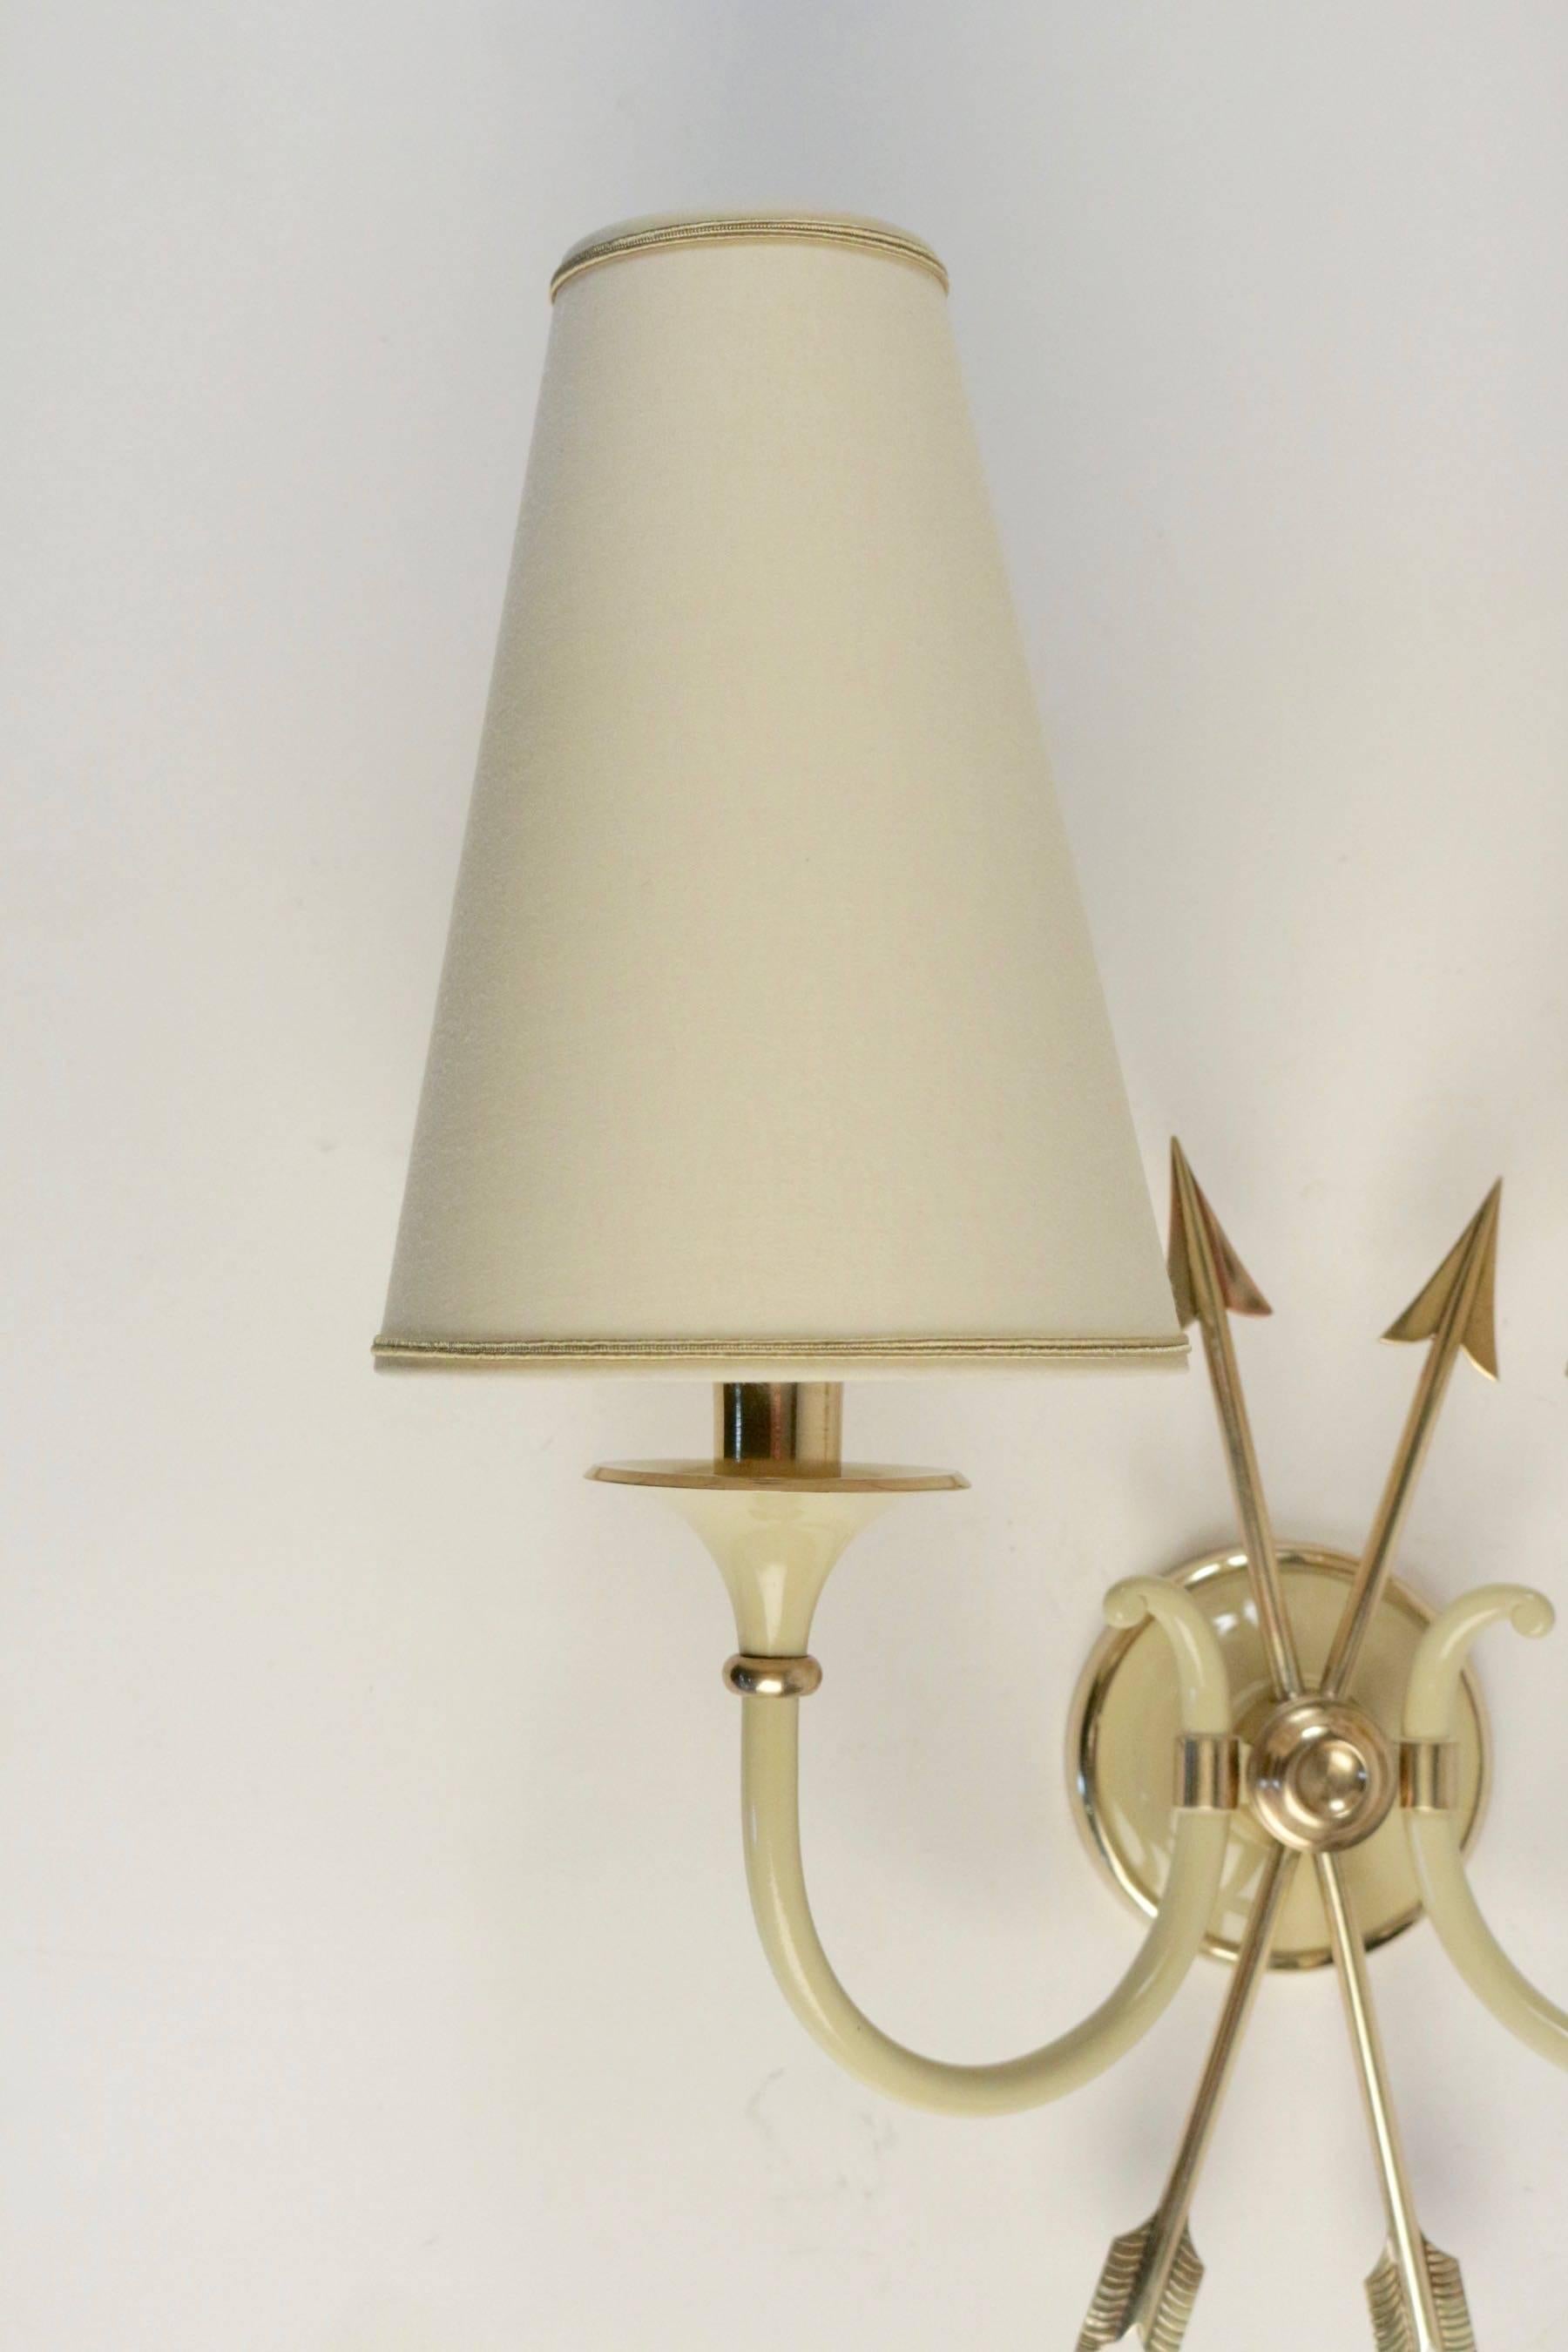 French Pair of Neoclassical Sconces with Two Crossed Arrows by Maison Lunel, 1950